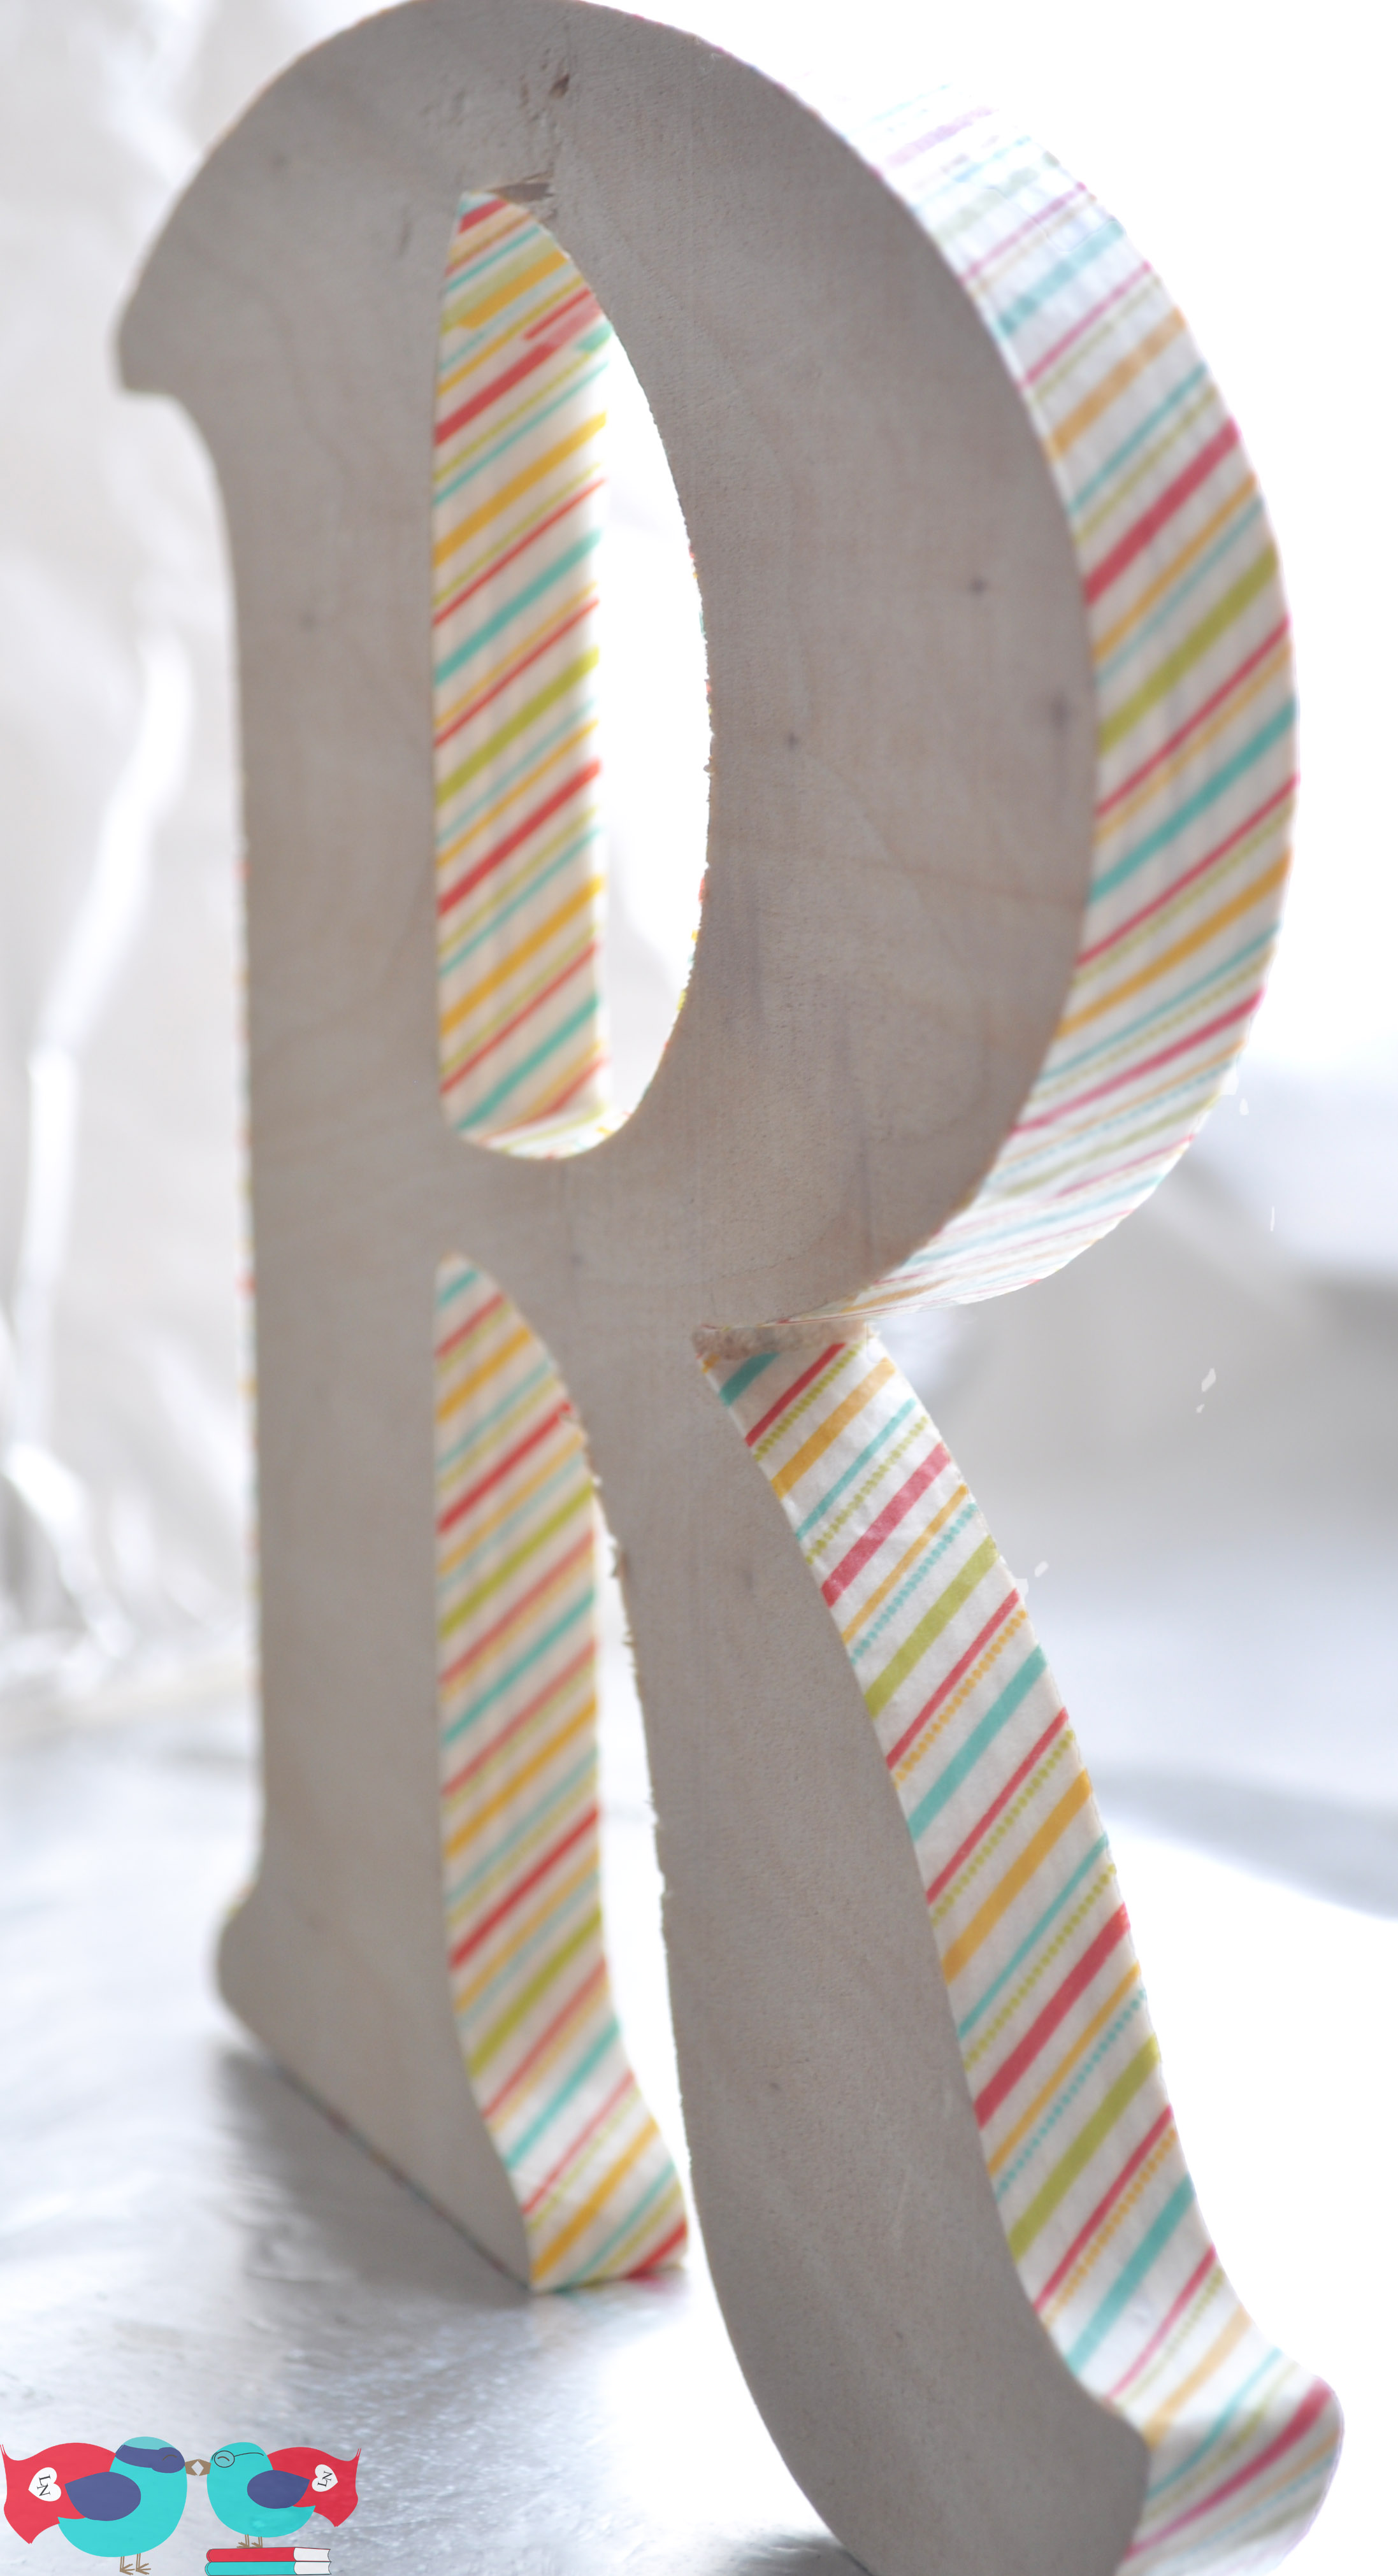 How to decorate a Wooden Letter with Washi Tape - The Love Nerds